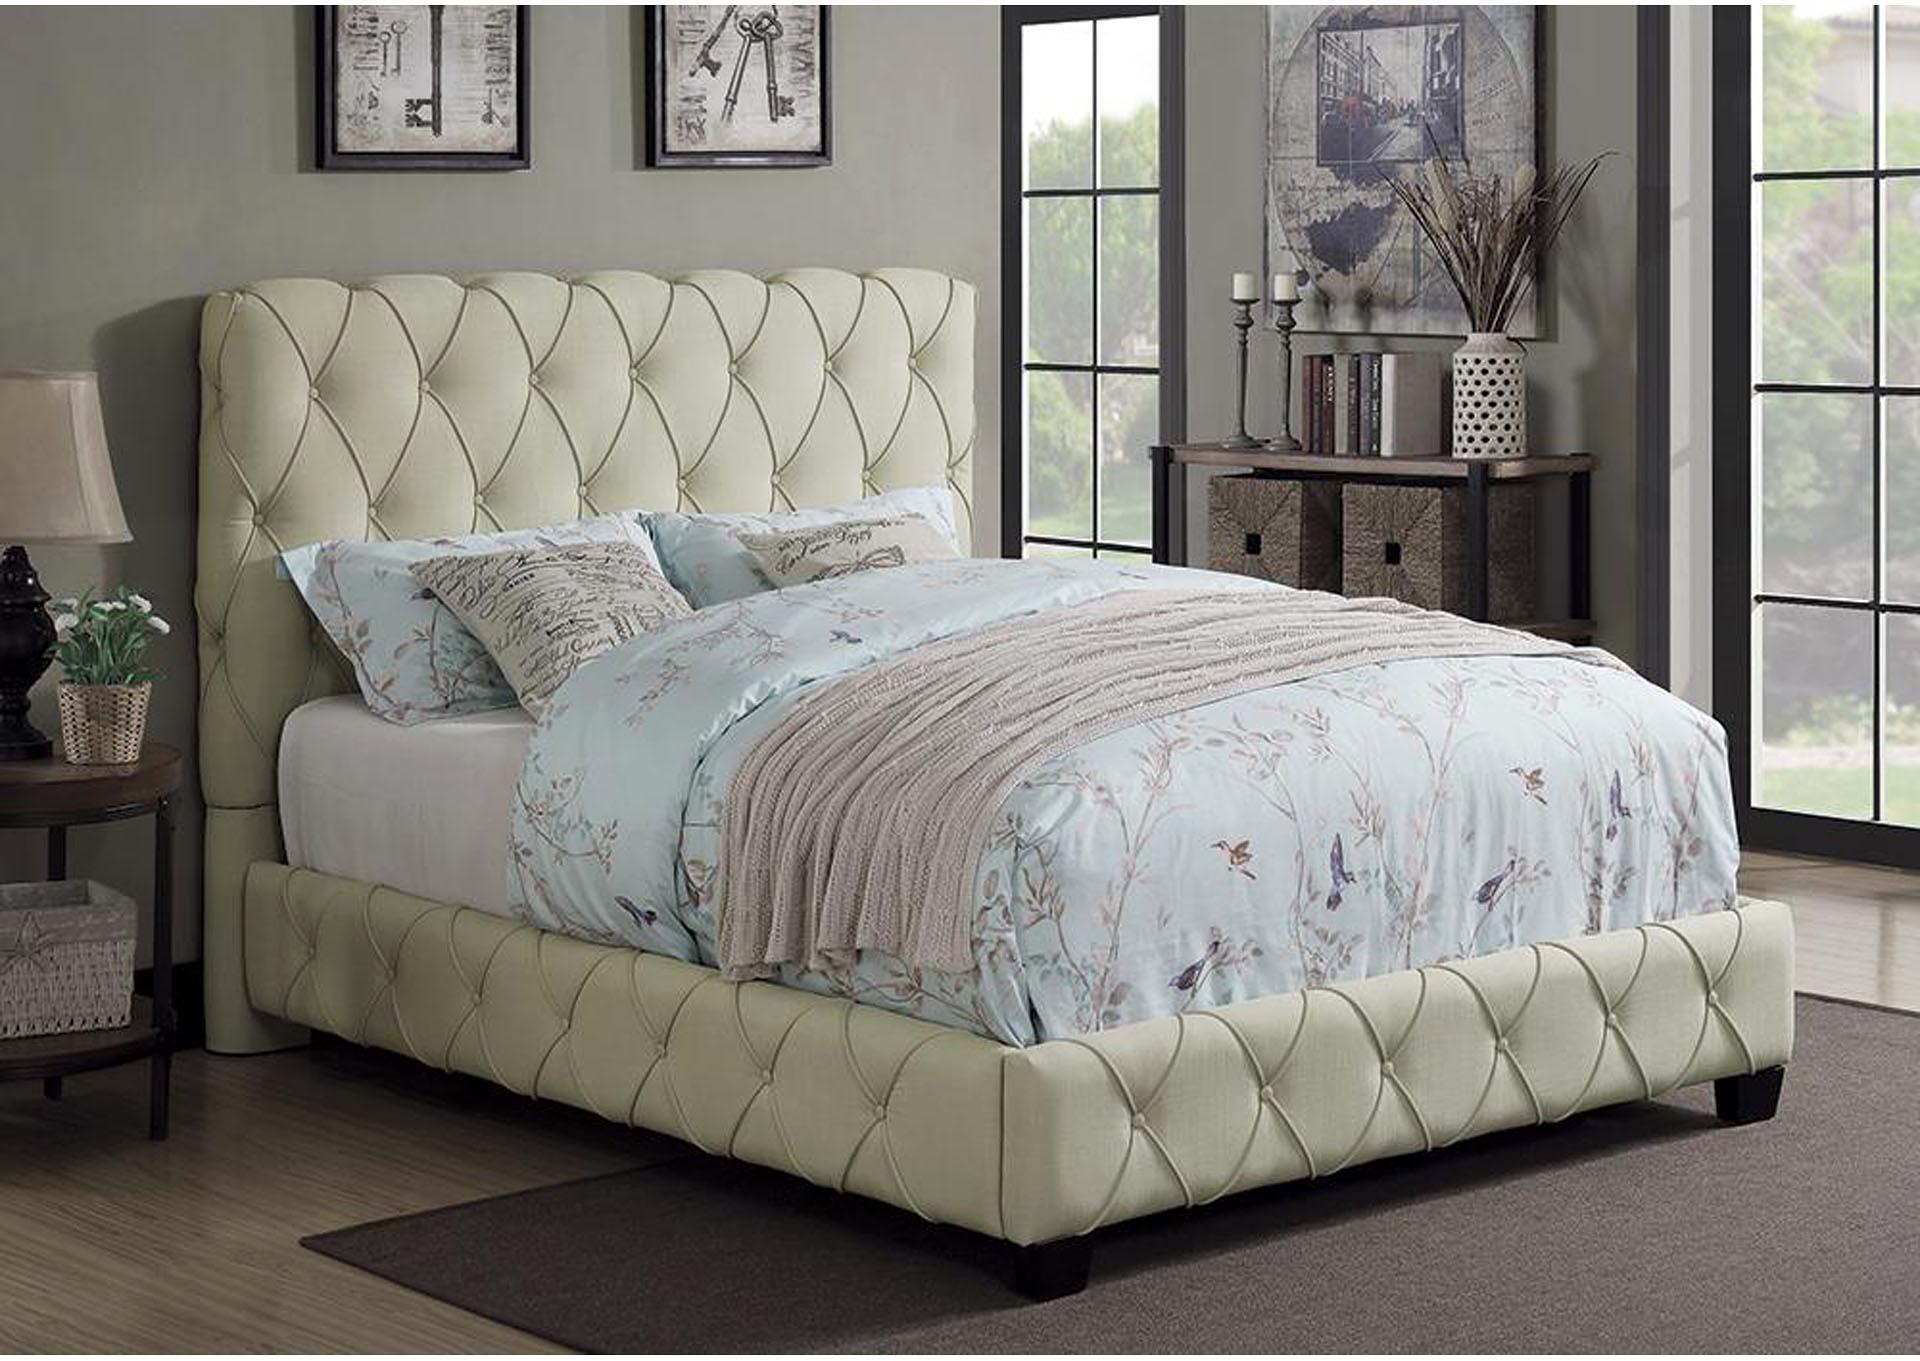 Elsinore Beige Upholstered Full Bed,InStore Products